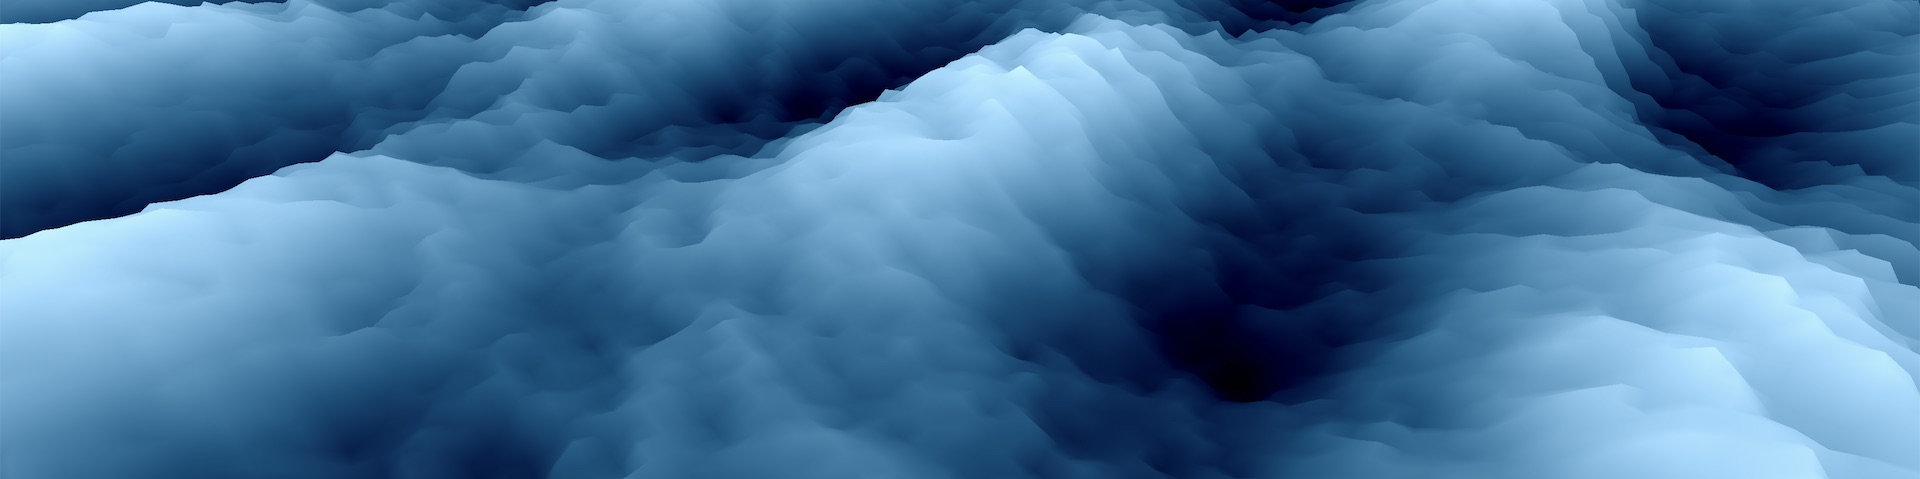 A wide banner image depicting an abstract representation of a tumultuous sea with dynamic shades of blue, creating the illusion of waves in motion under a stormy sky.